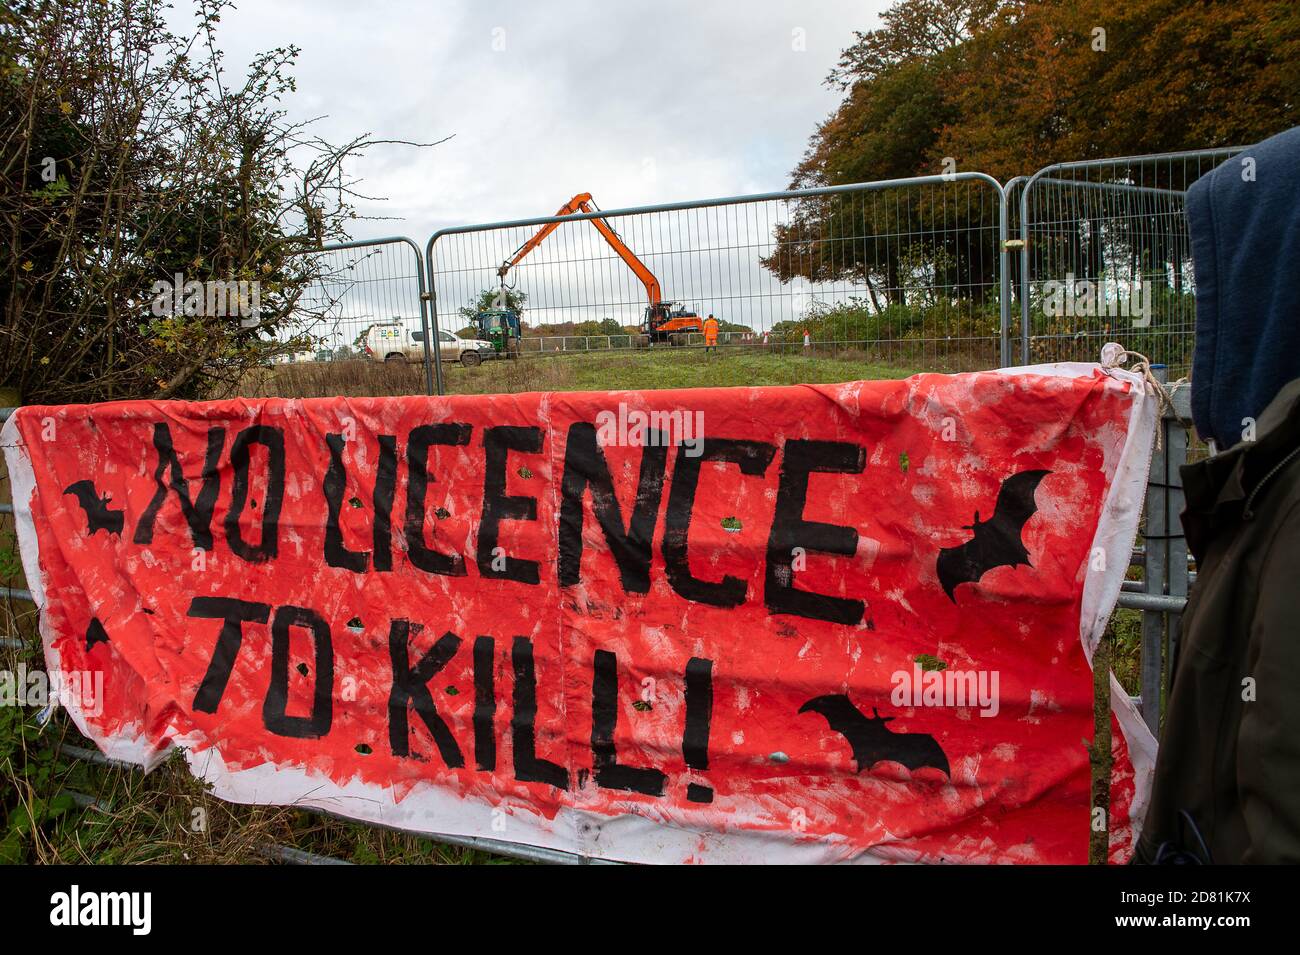 Aylesbury Vale, Buckinghamshire, UK. 26th October, 2020. Anti HS2 protesters at the site. HS2 are continuing to fell ancient woodland at Grim's Ditch in Buckinghamshire this morning. Anti HS2 environmental campaigners allege that HS2 do not have a bat licence for felling in these ancient woodlands and so are potentially committing a wildlife crime. They have reported the matter to the Police again this morning an are awaiting a response. Construction of the High Speed Rail from London to Birmingham puts 108 ancient woodlands, 33 SSSIs and 693 wildlife sites at risk. Credit: Maureen McLean/Alam Stock Photo